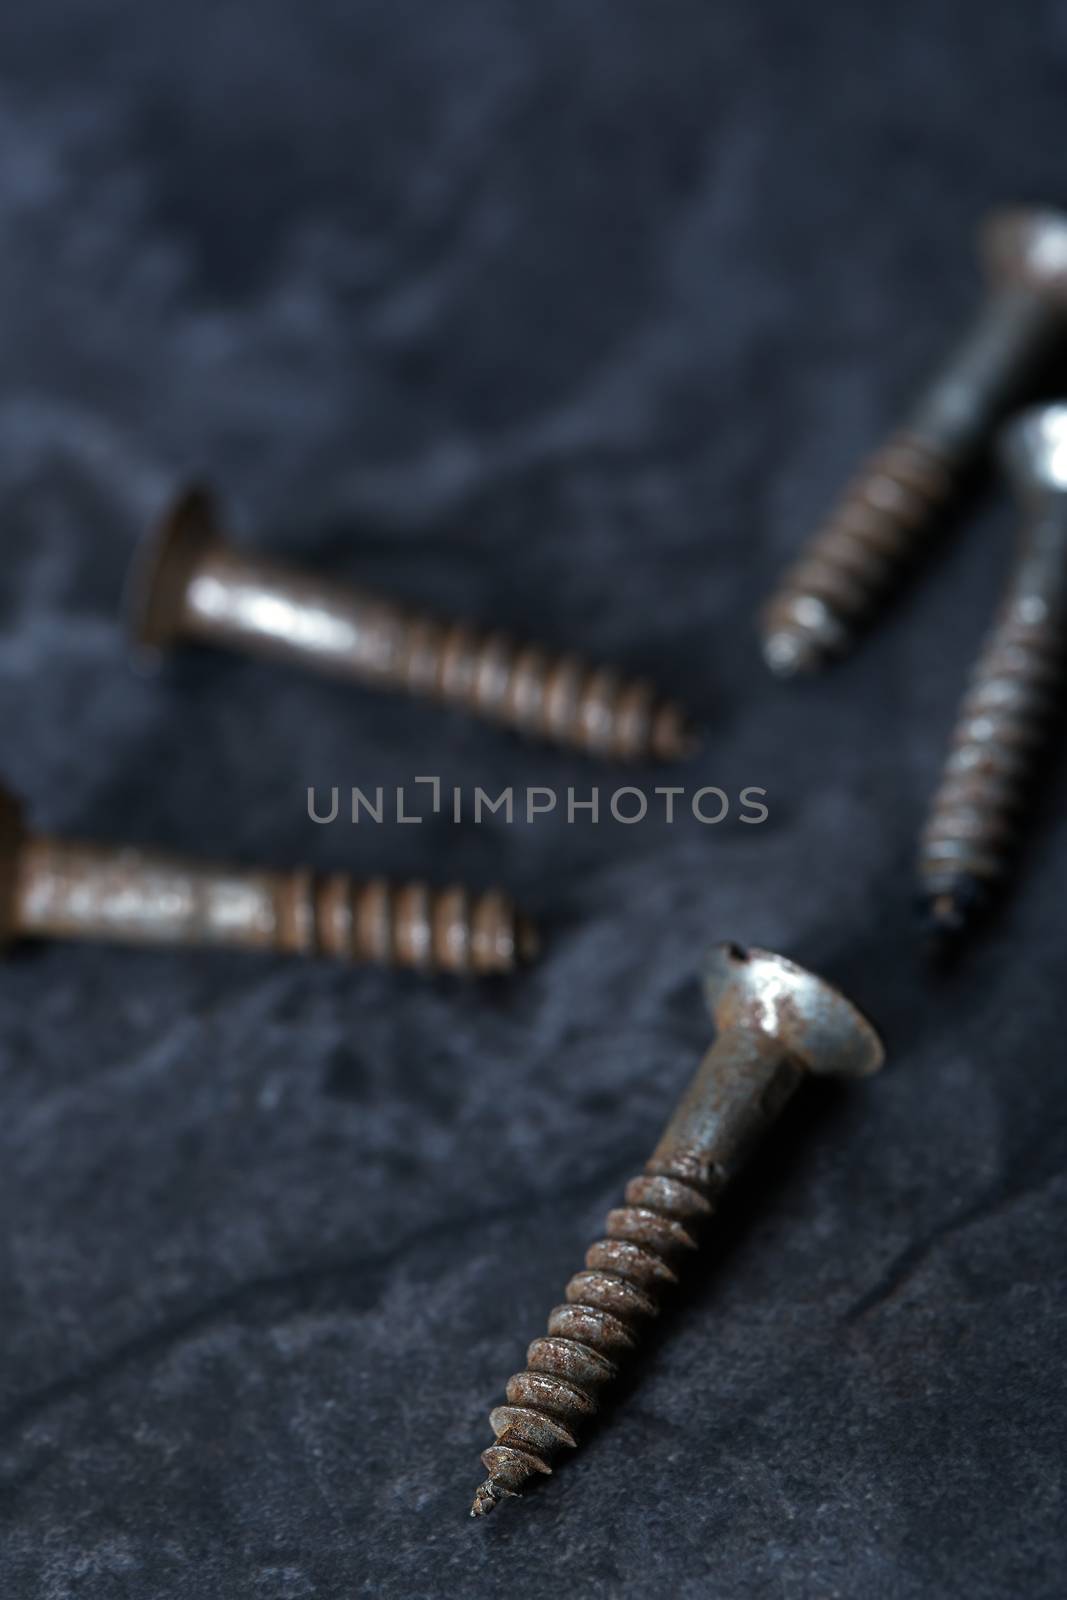 Group of rusty screws by Novic